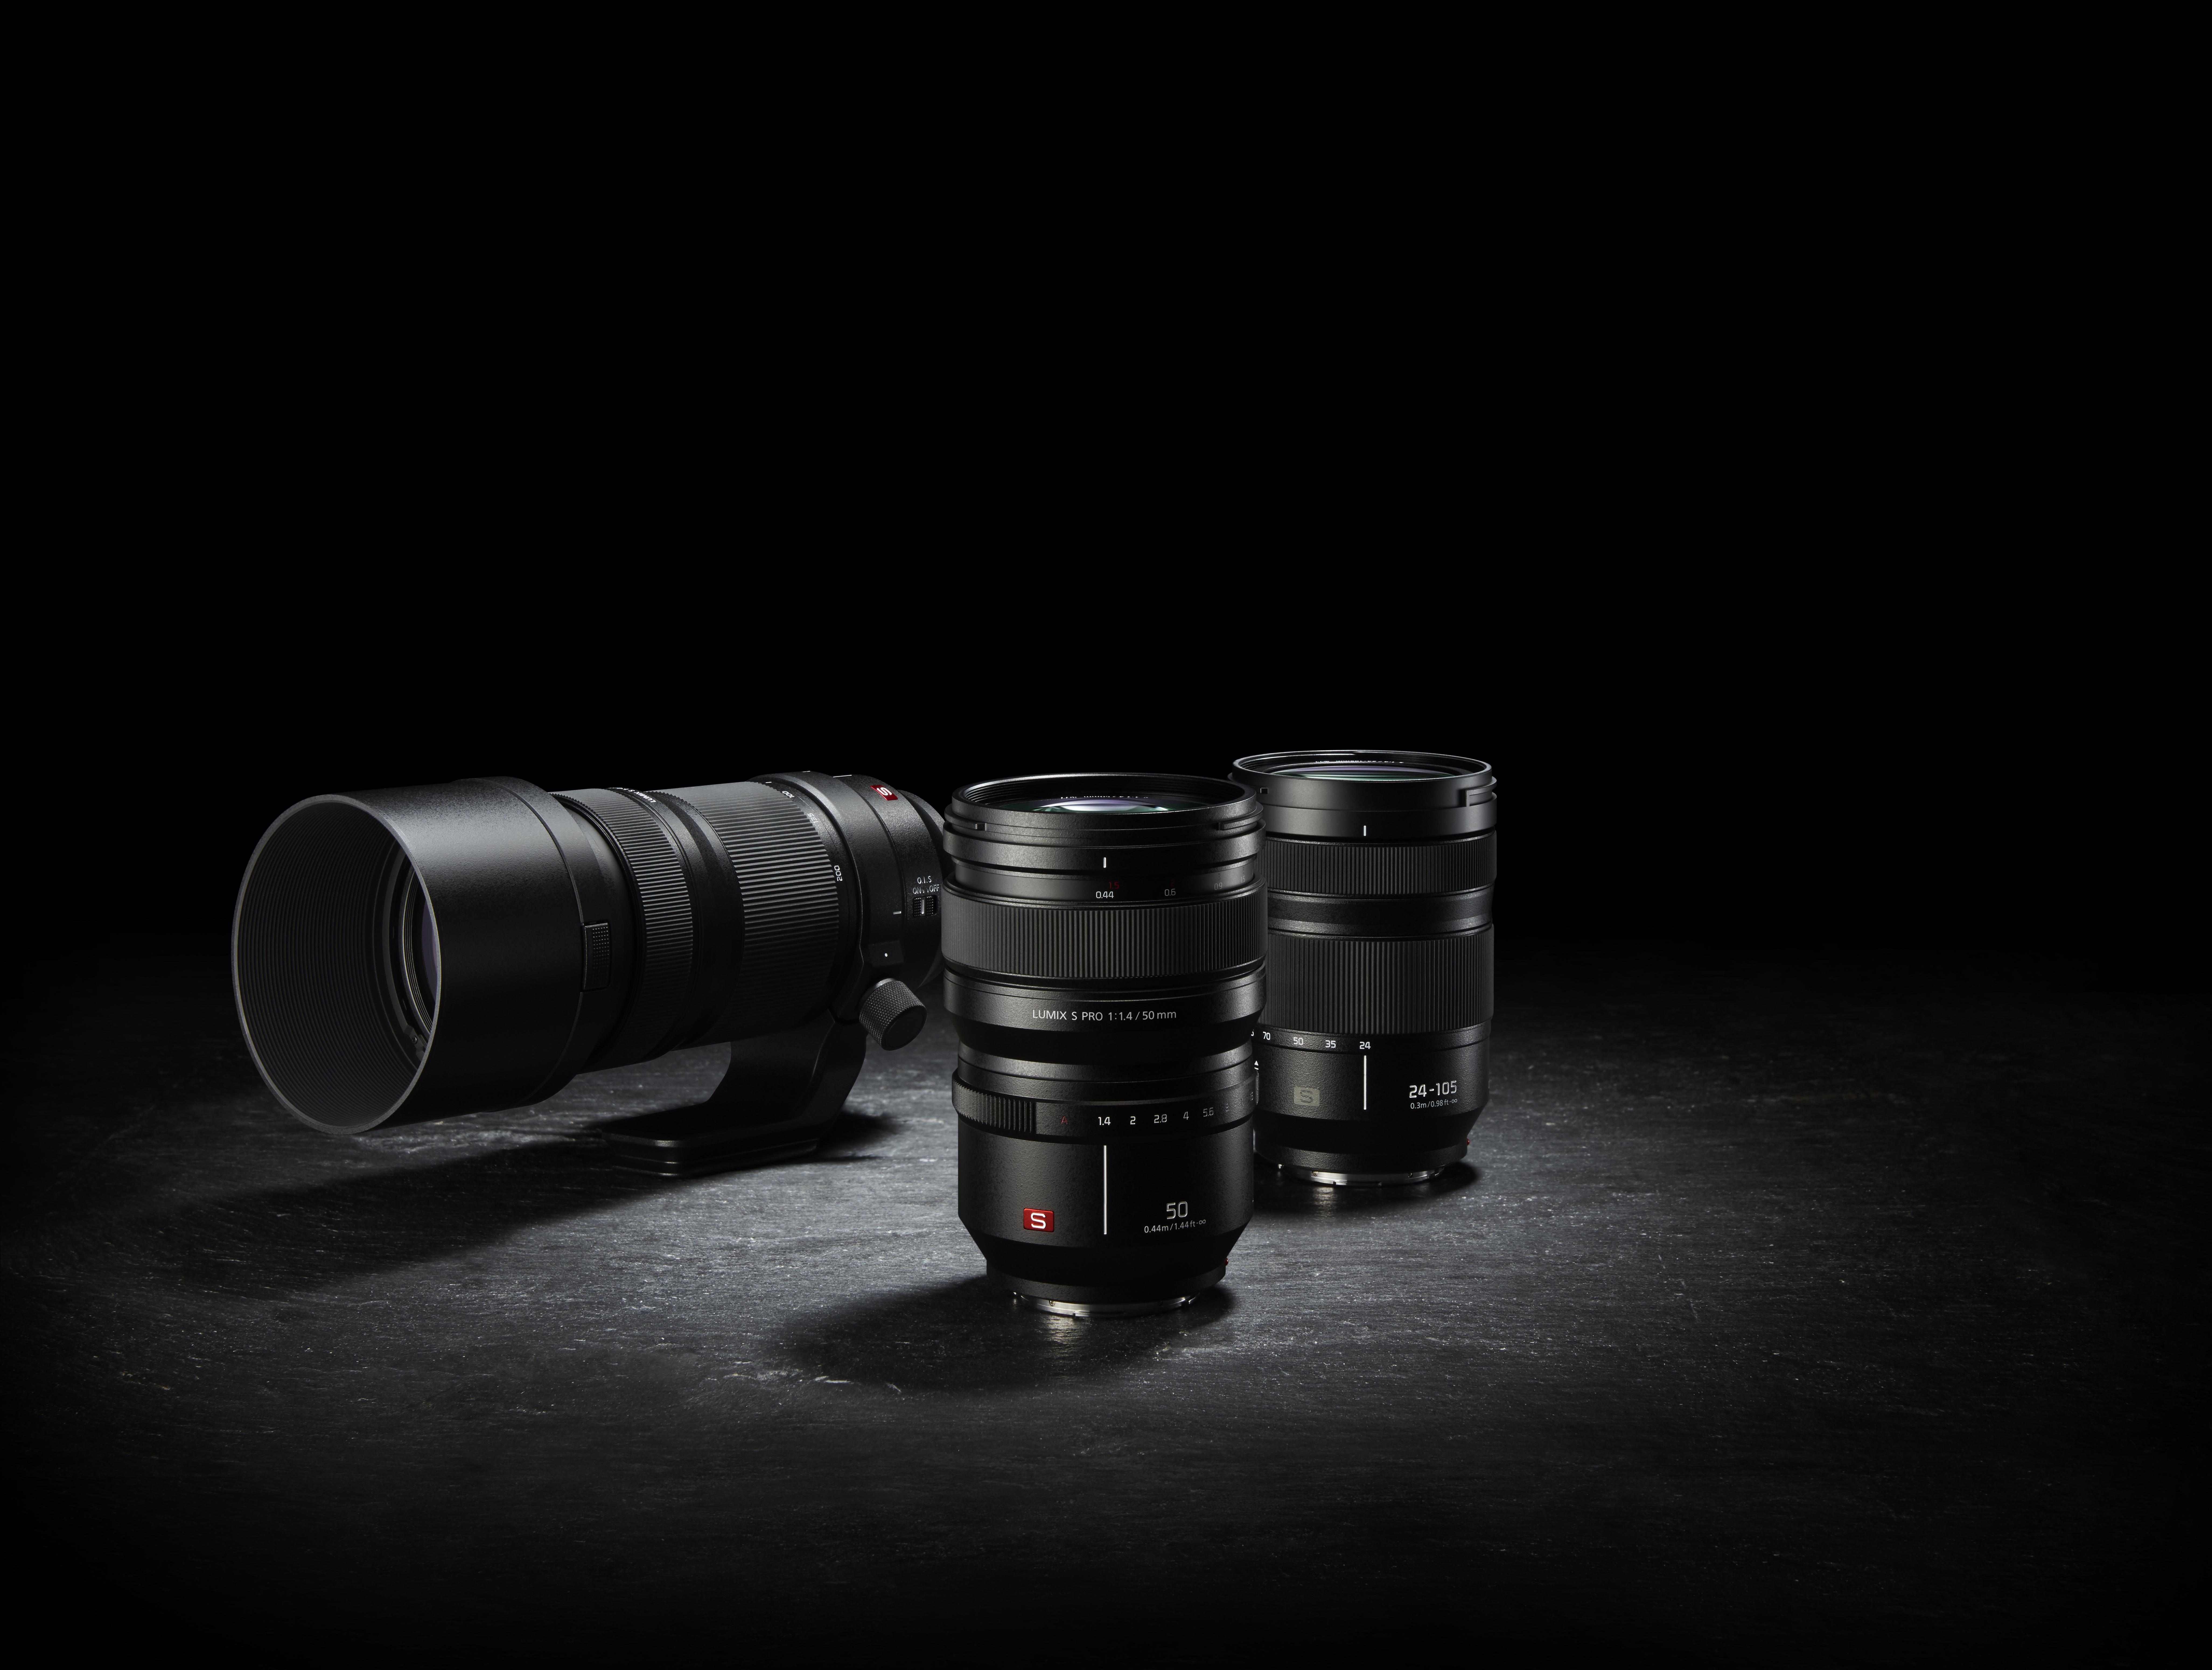 photo: L-Mount interchangeable lenses for the LUMIX S series